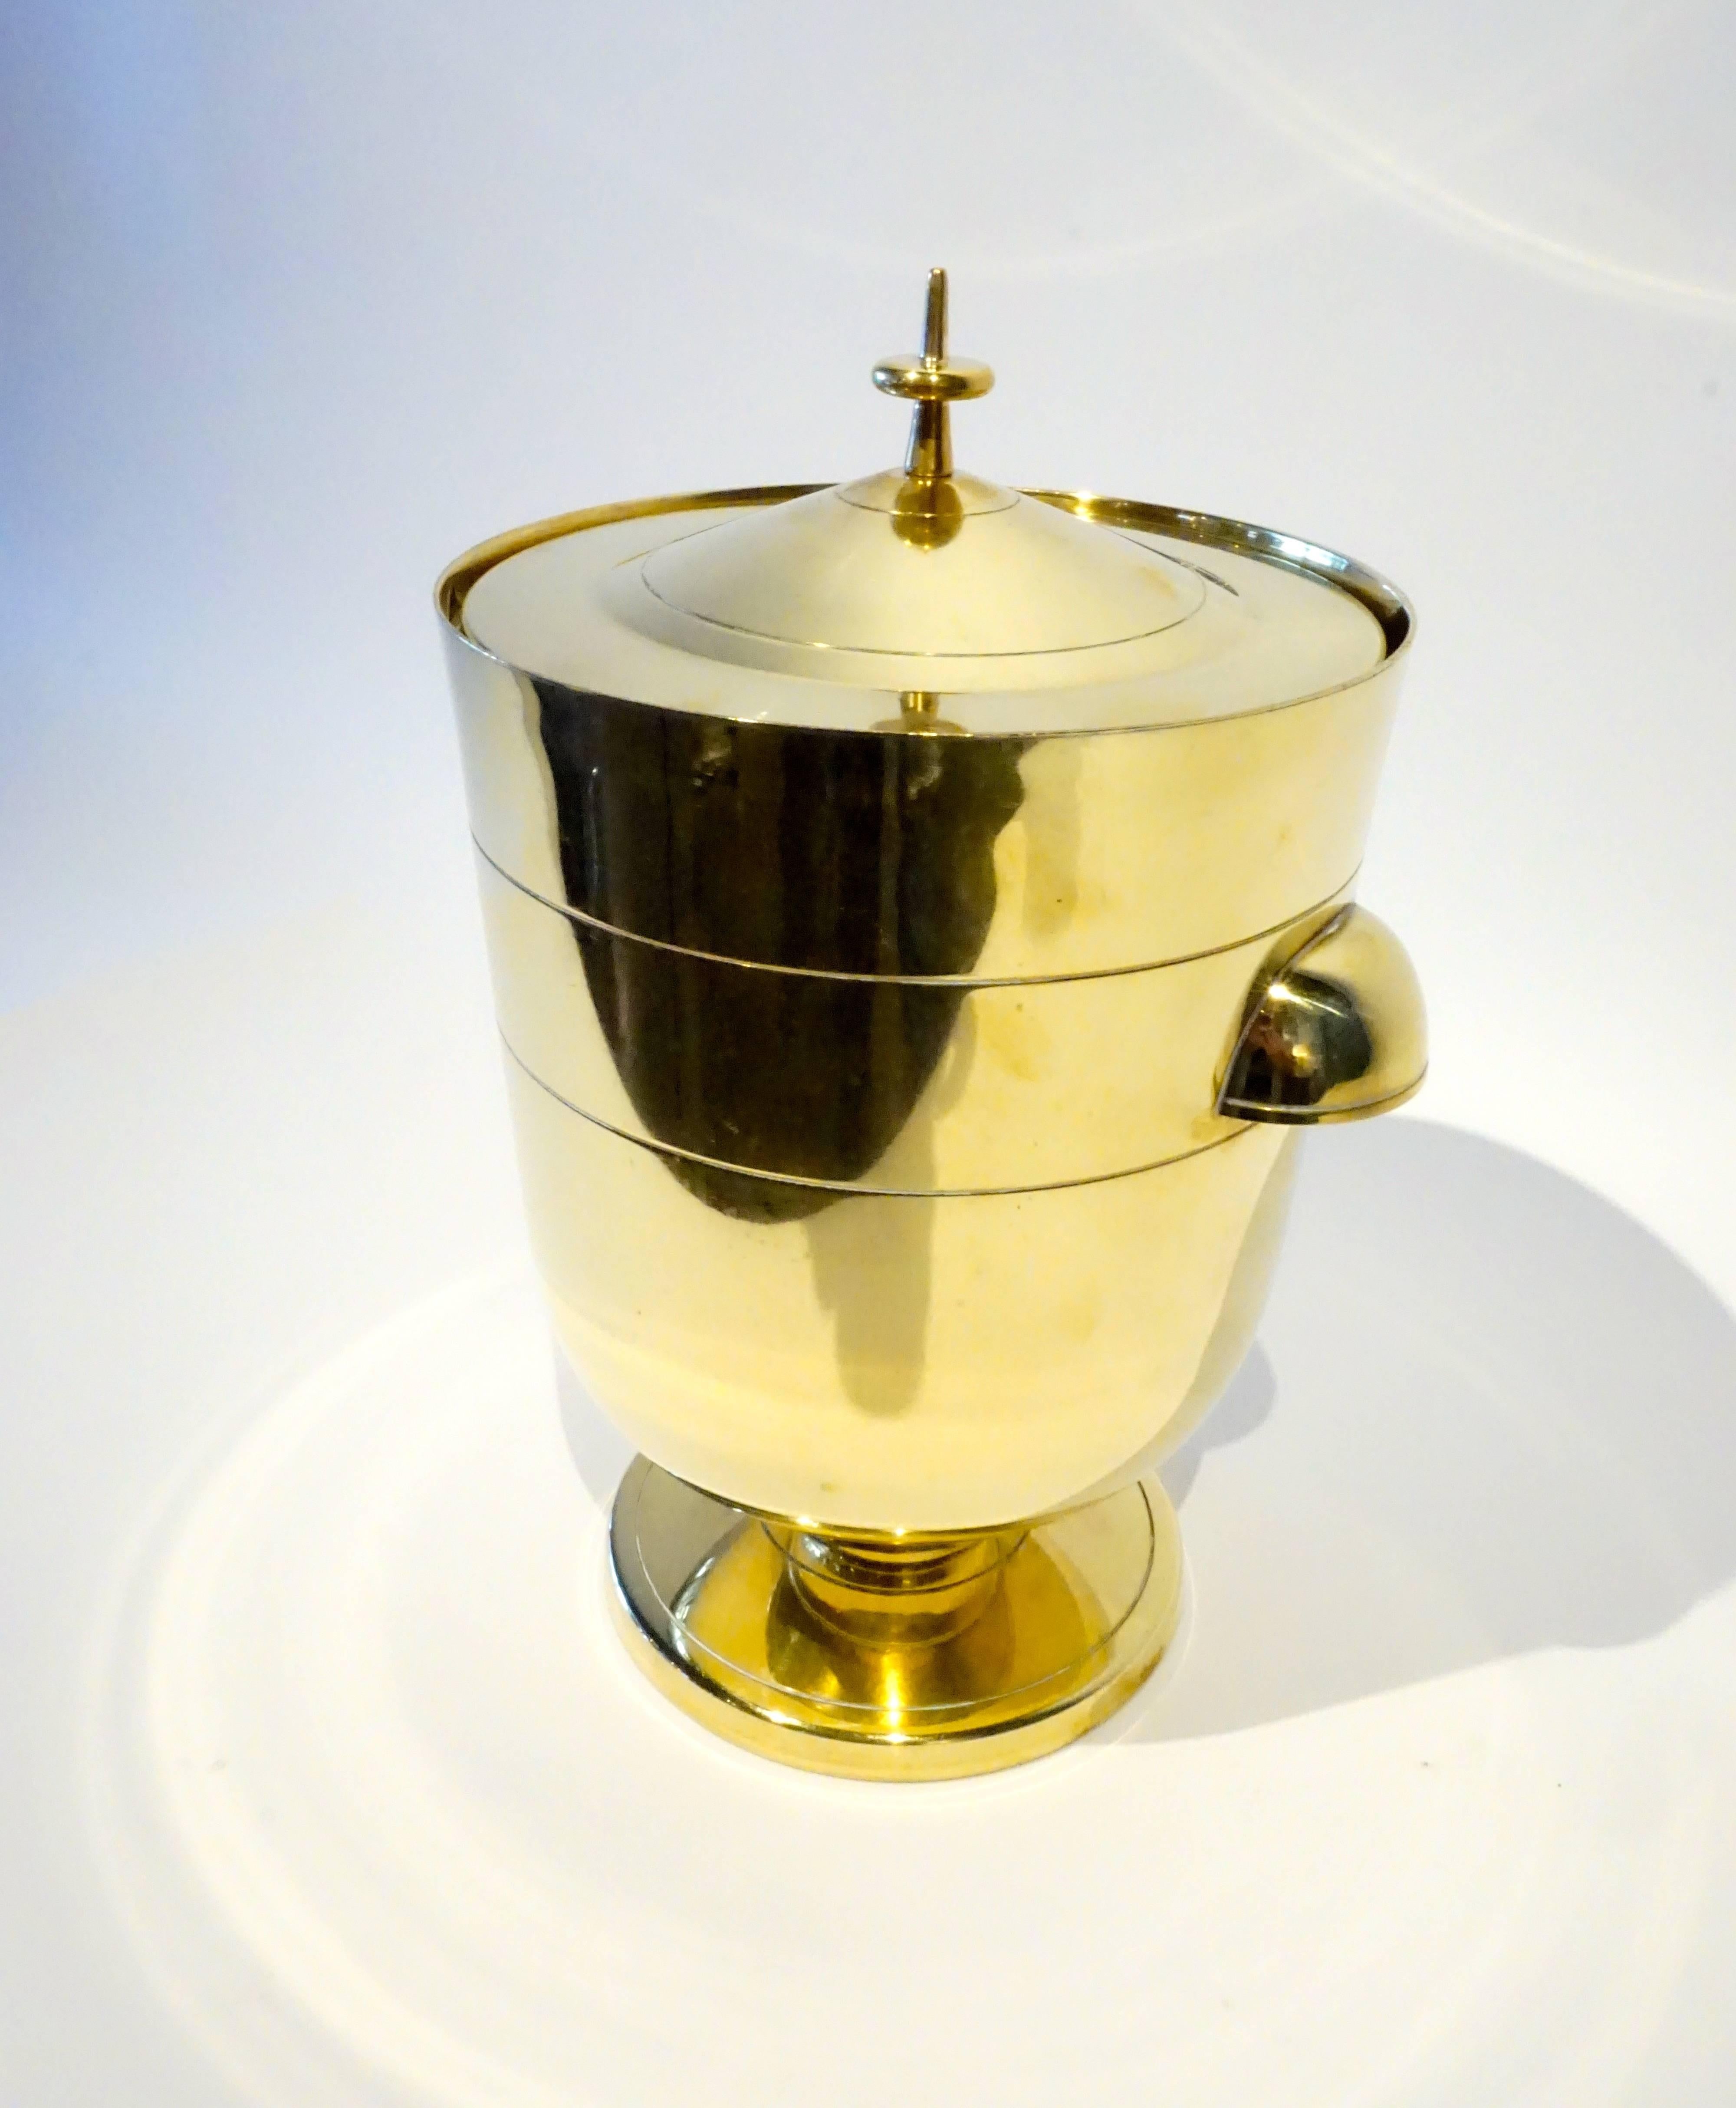 A stylish and highly sought after polished brass ice bucket or wine cooler designed by Tommi Parzinger and made/retailed by Dorlyn Silversmiths in the 1950's. The bucket retains its original mercury glass lined interior that is acid-etched with